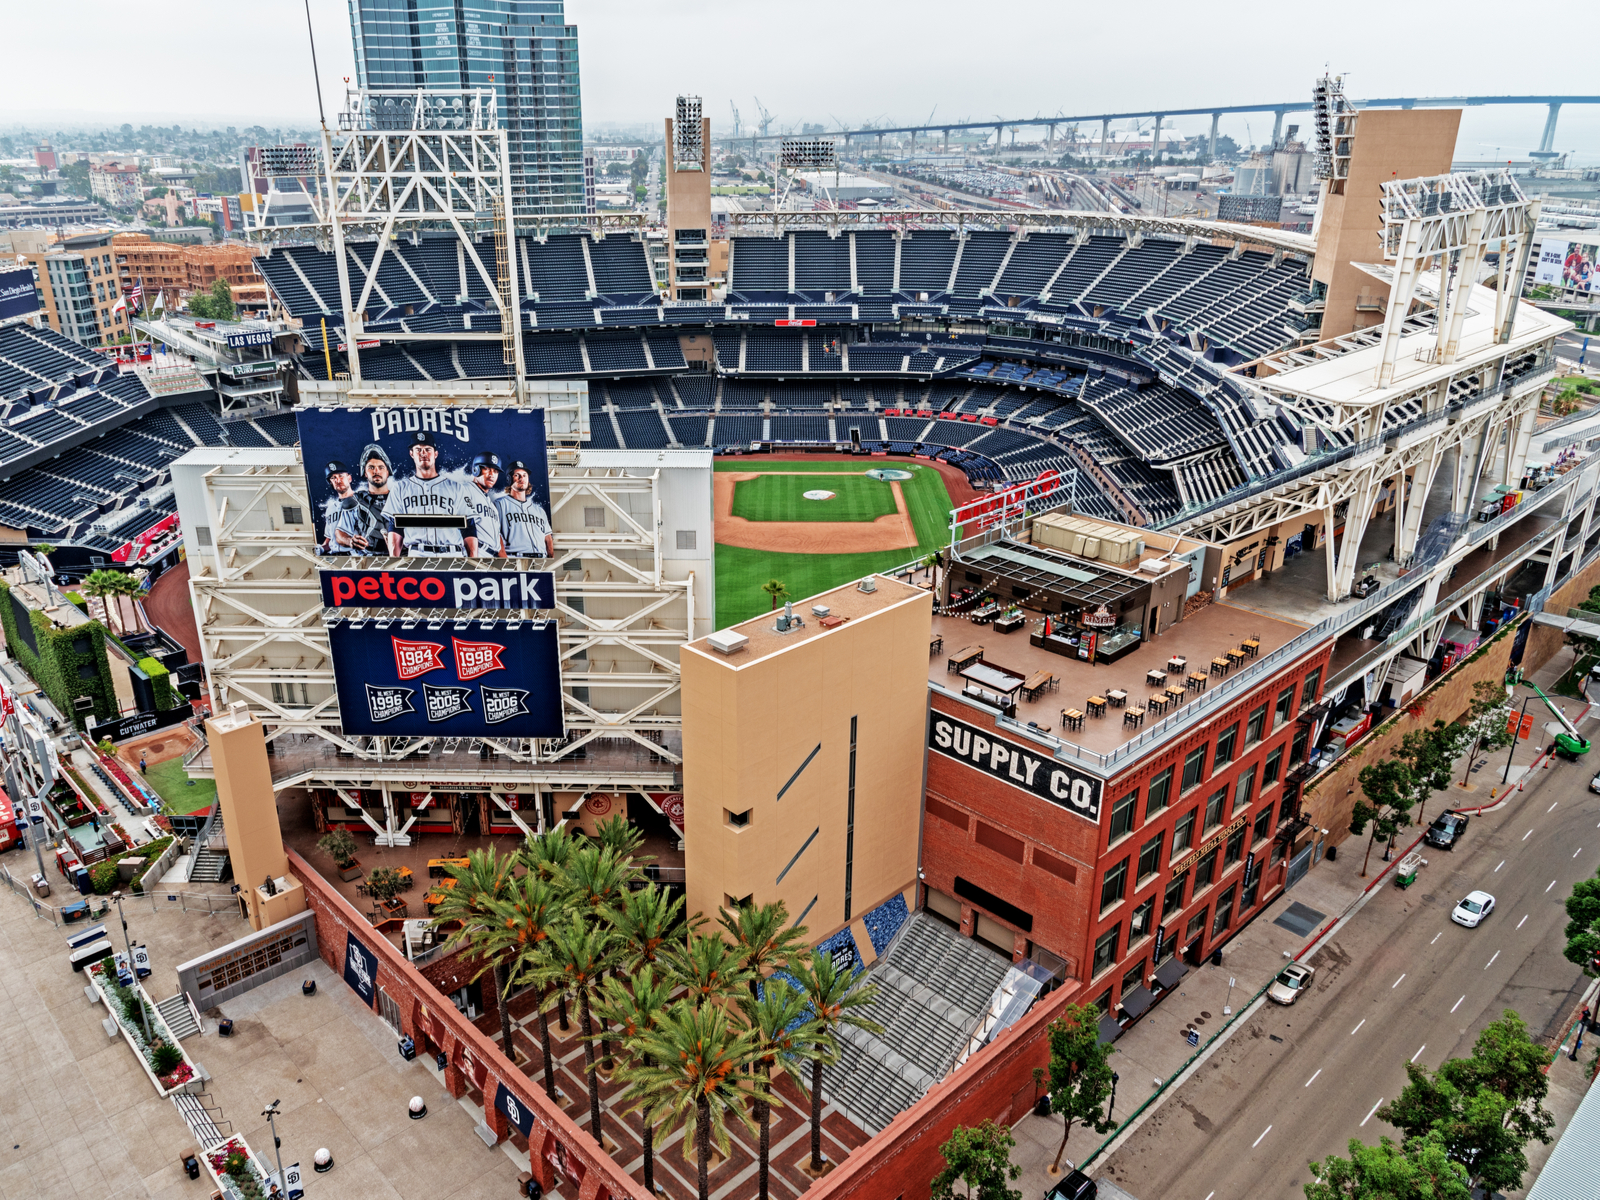 Aerial view of Petco Park, where the Padres play and one of the best things to do in San Diego